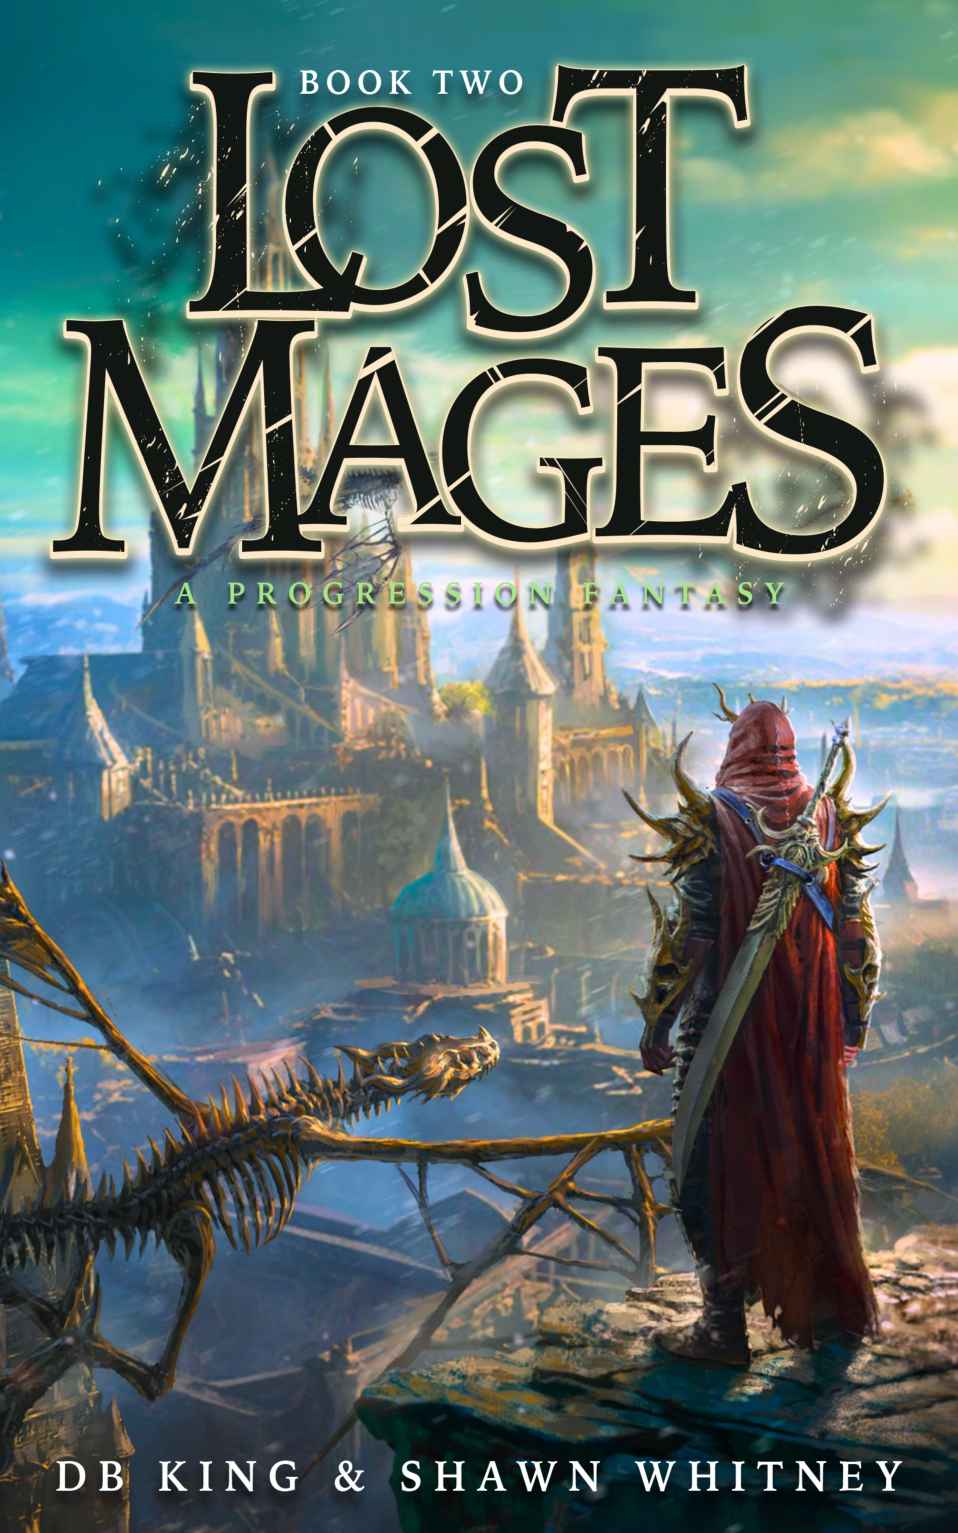 Lost Mages 2